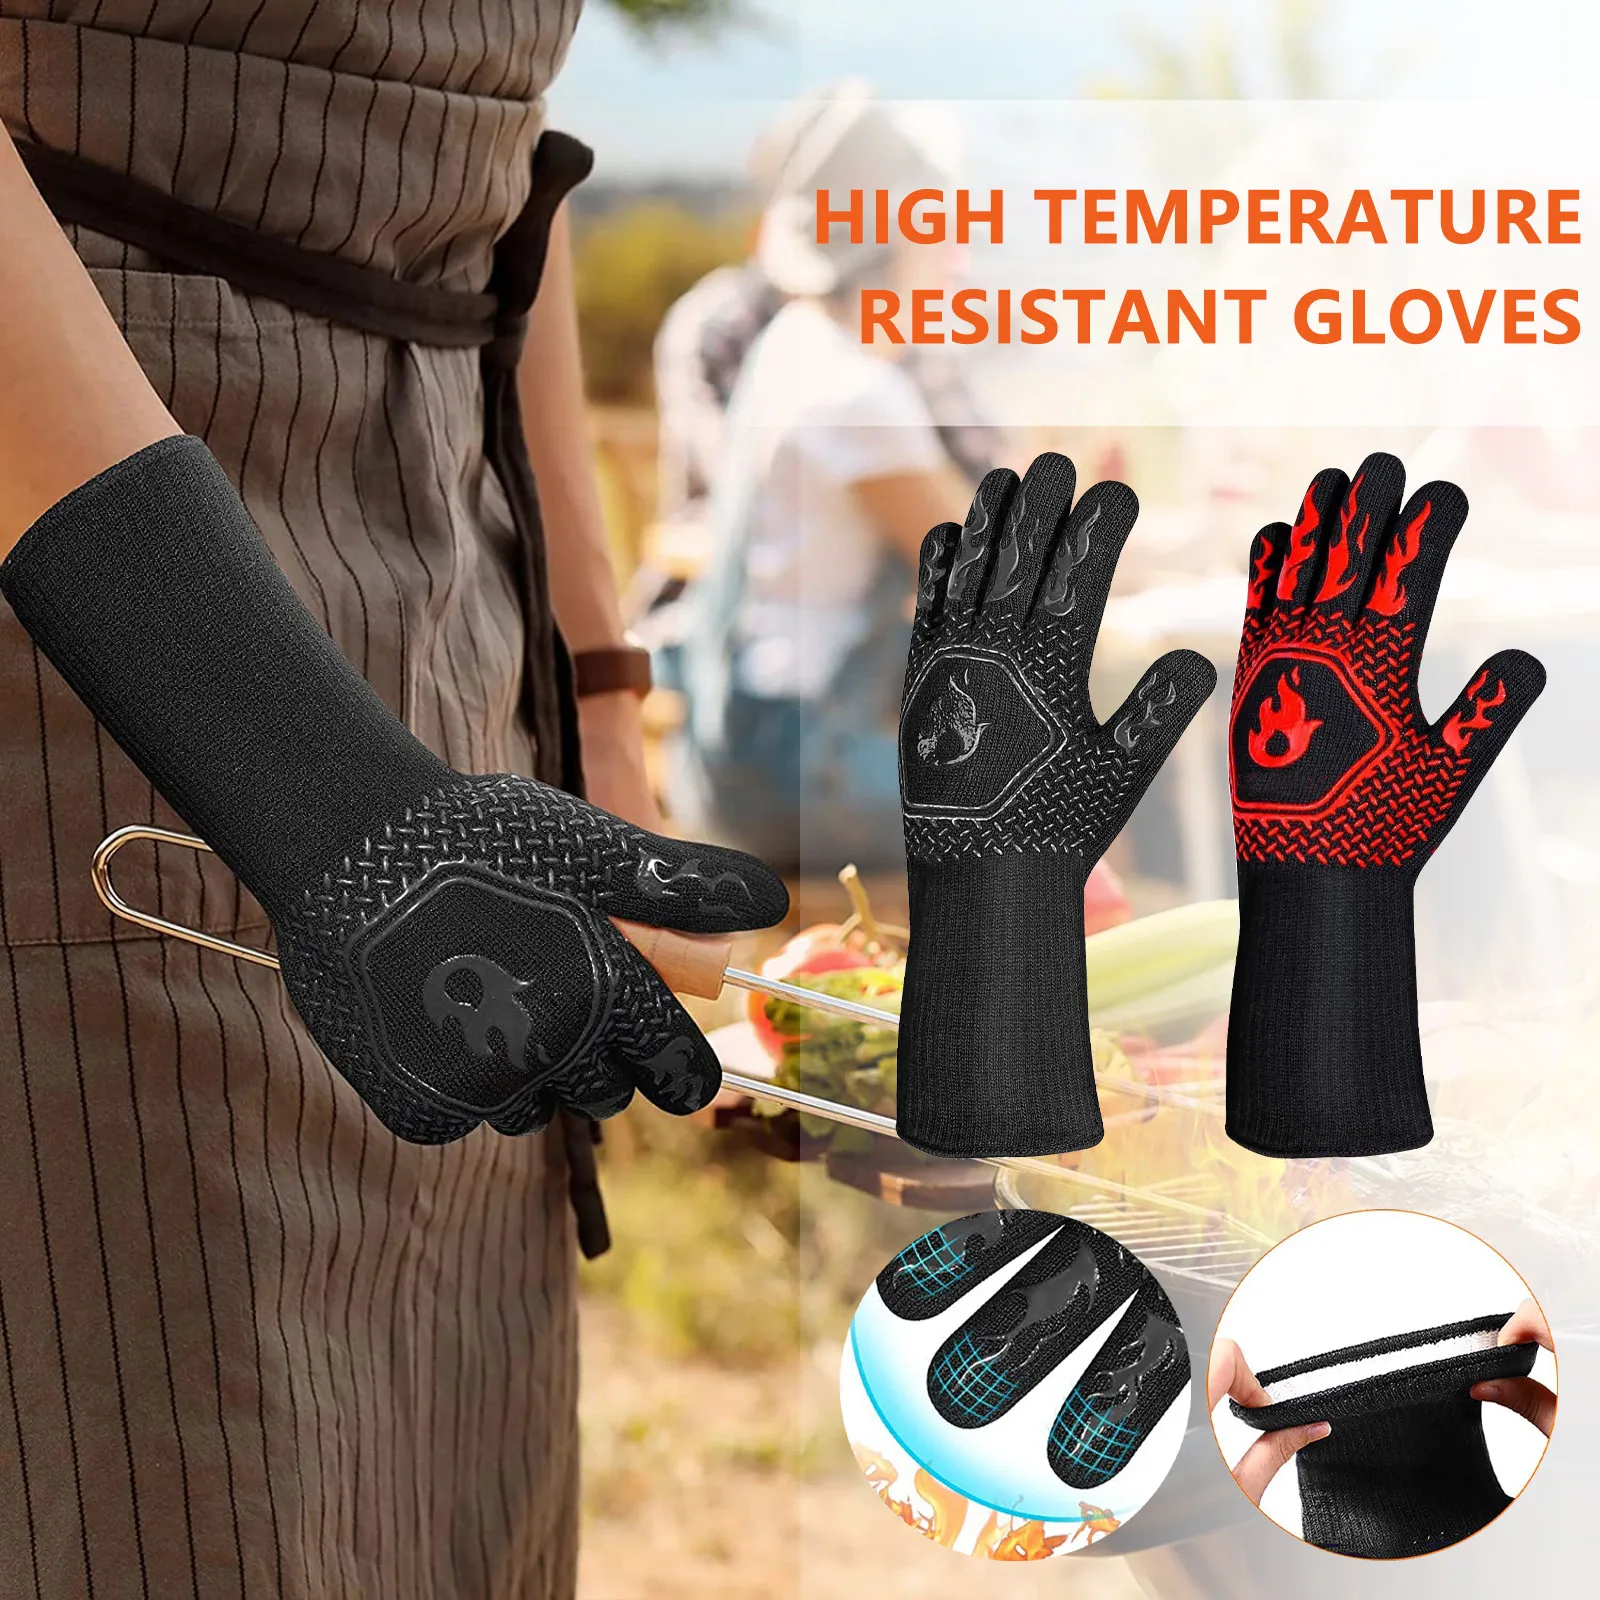 

BBQ Grill Gloves Heat Resistant, High Temp Resistance Fireproof Glove For Barbecue, Washable Oven Mitts Extreme Hot Proof Mitten